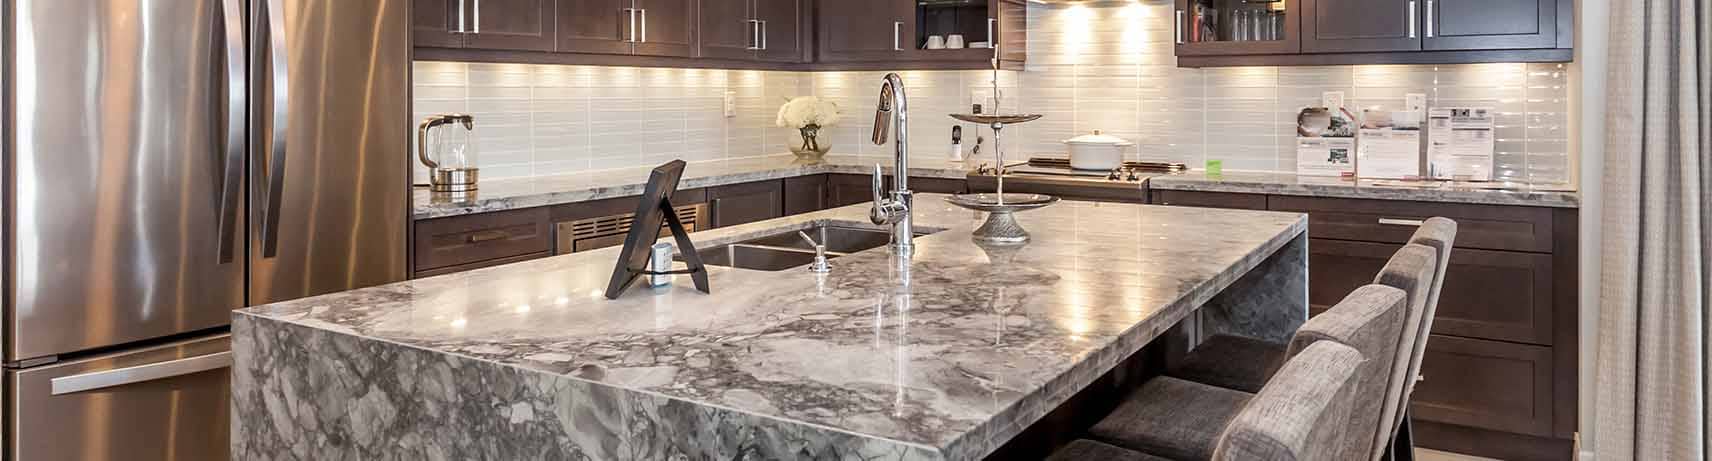 Houston General Contractor, Home Remodeling Contractor and Kitchen Remodeling Contractor